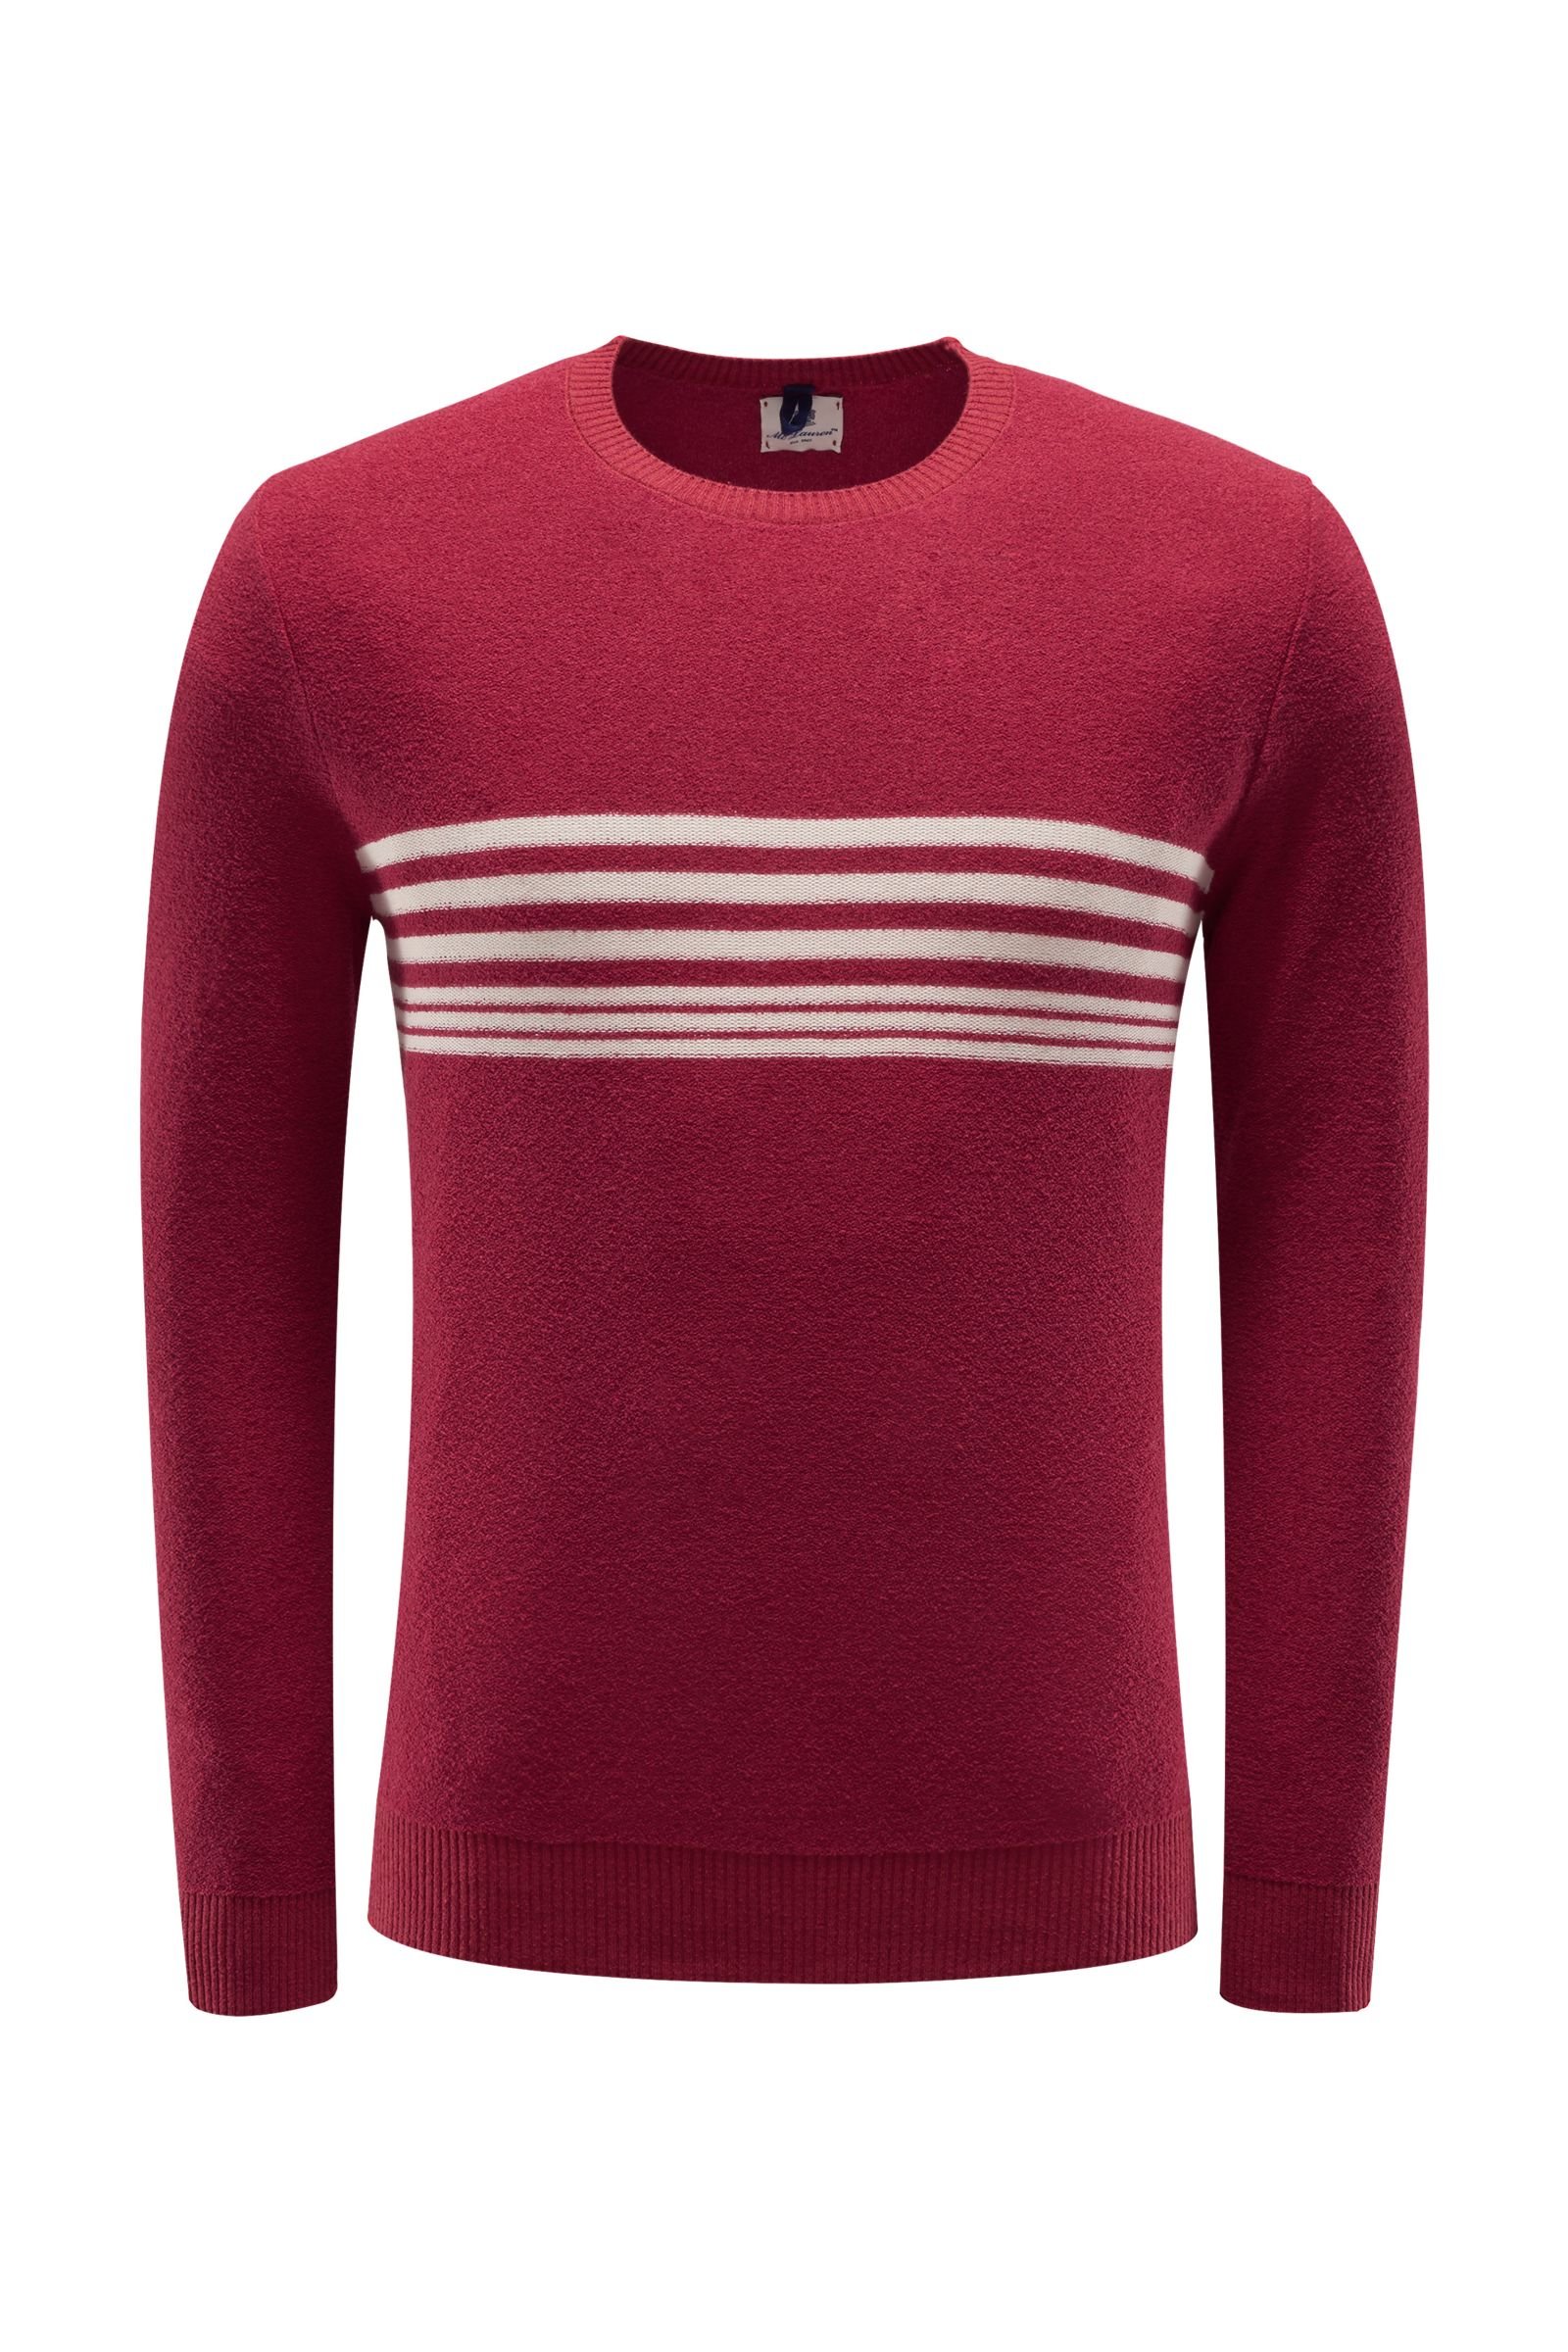 Terry crew neck jumper red/white